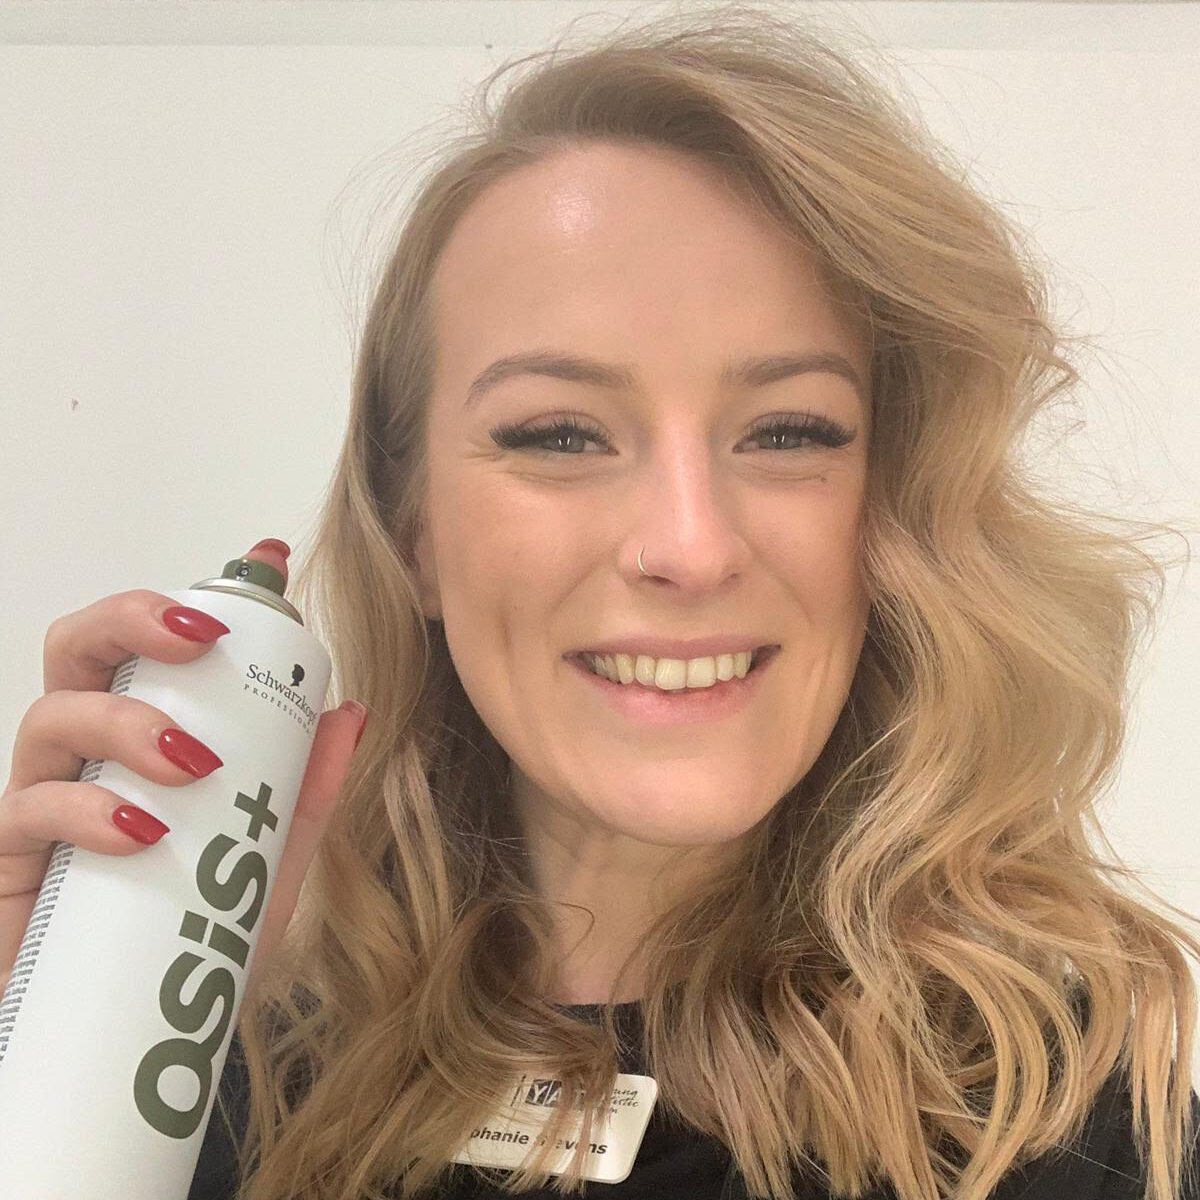 Steph hits the headlines and secures herself a space on Schwarzkopf Young Artistic Team